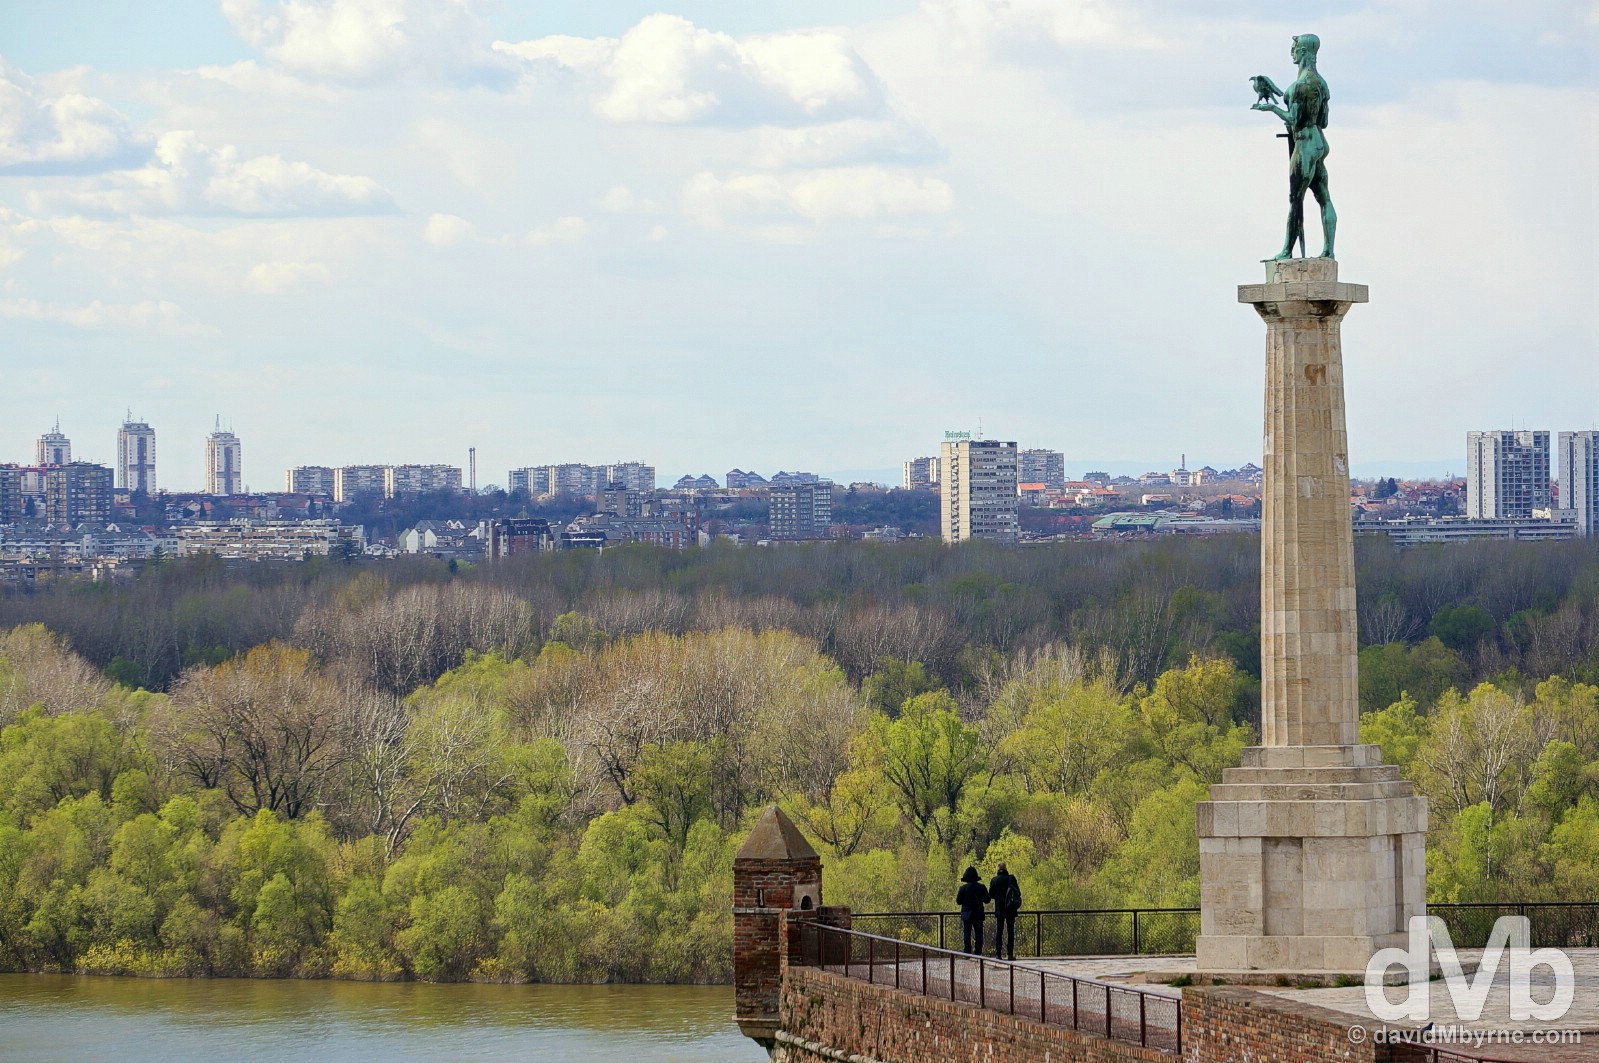 The Victor Monument of the Kalemegdam Citadel overlooking the Danube River in Belgrade, Serbia. April 3, 2015.